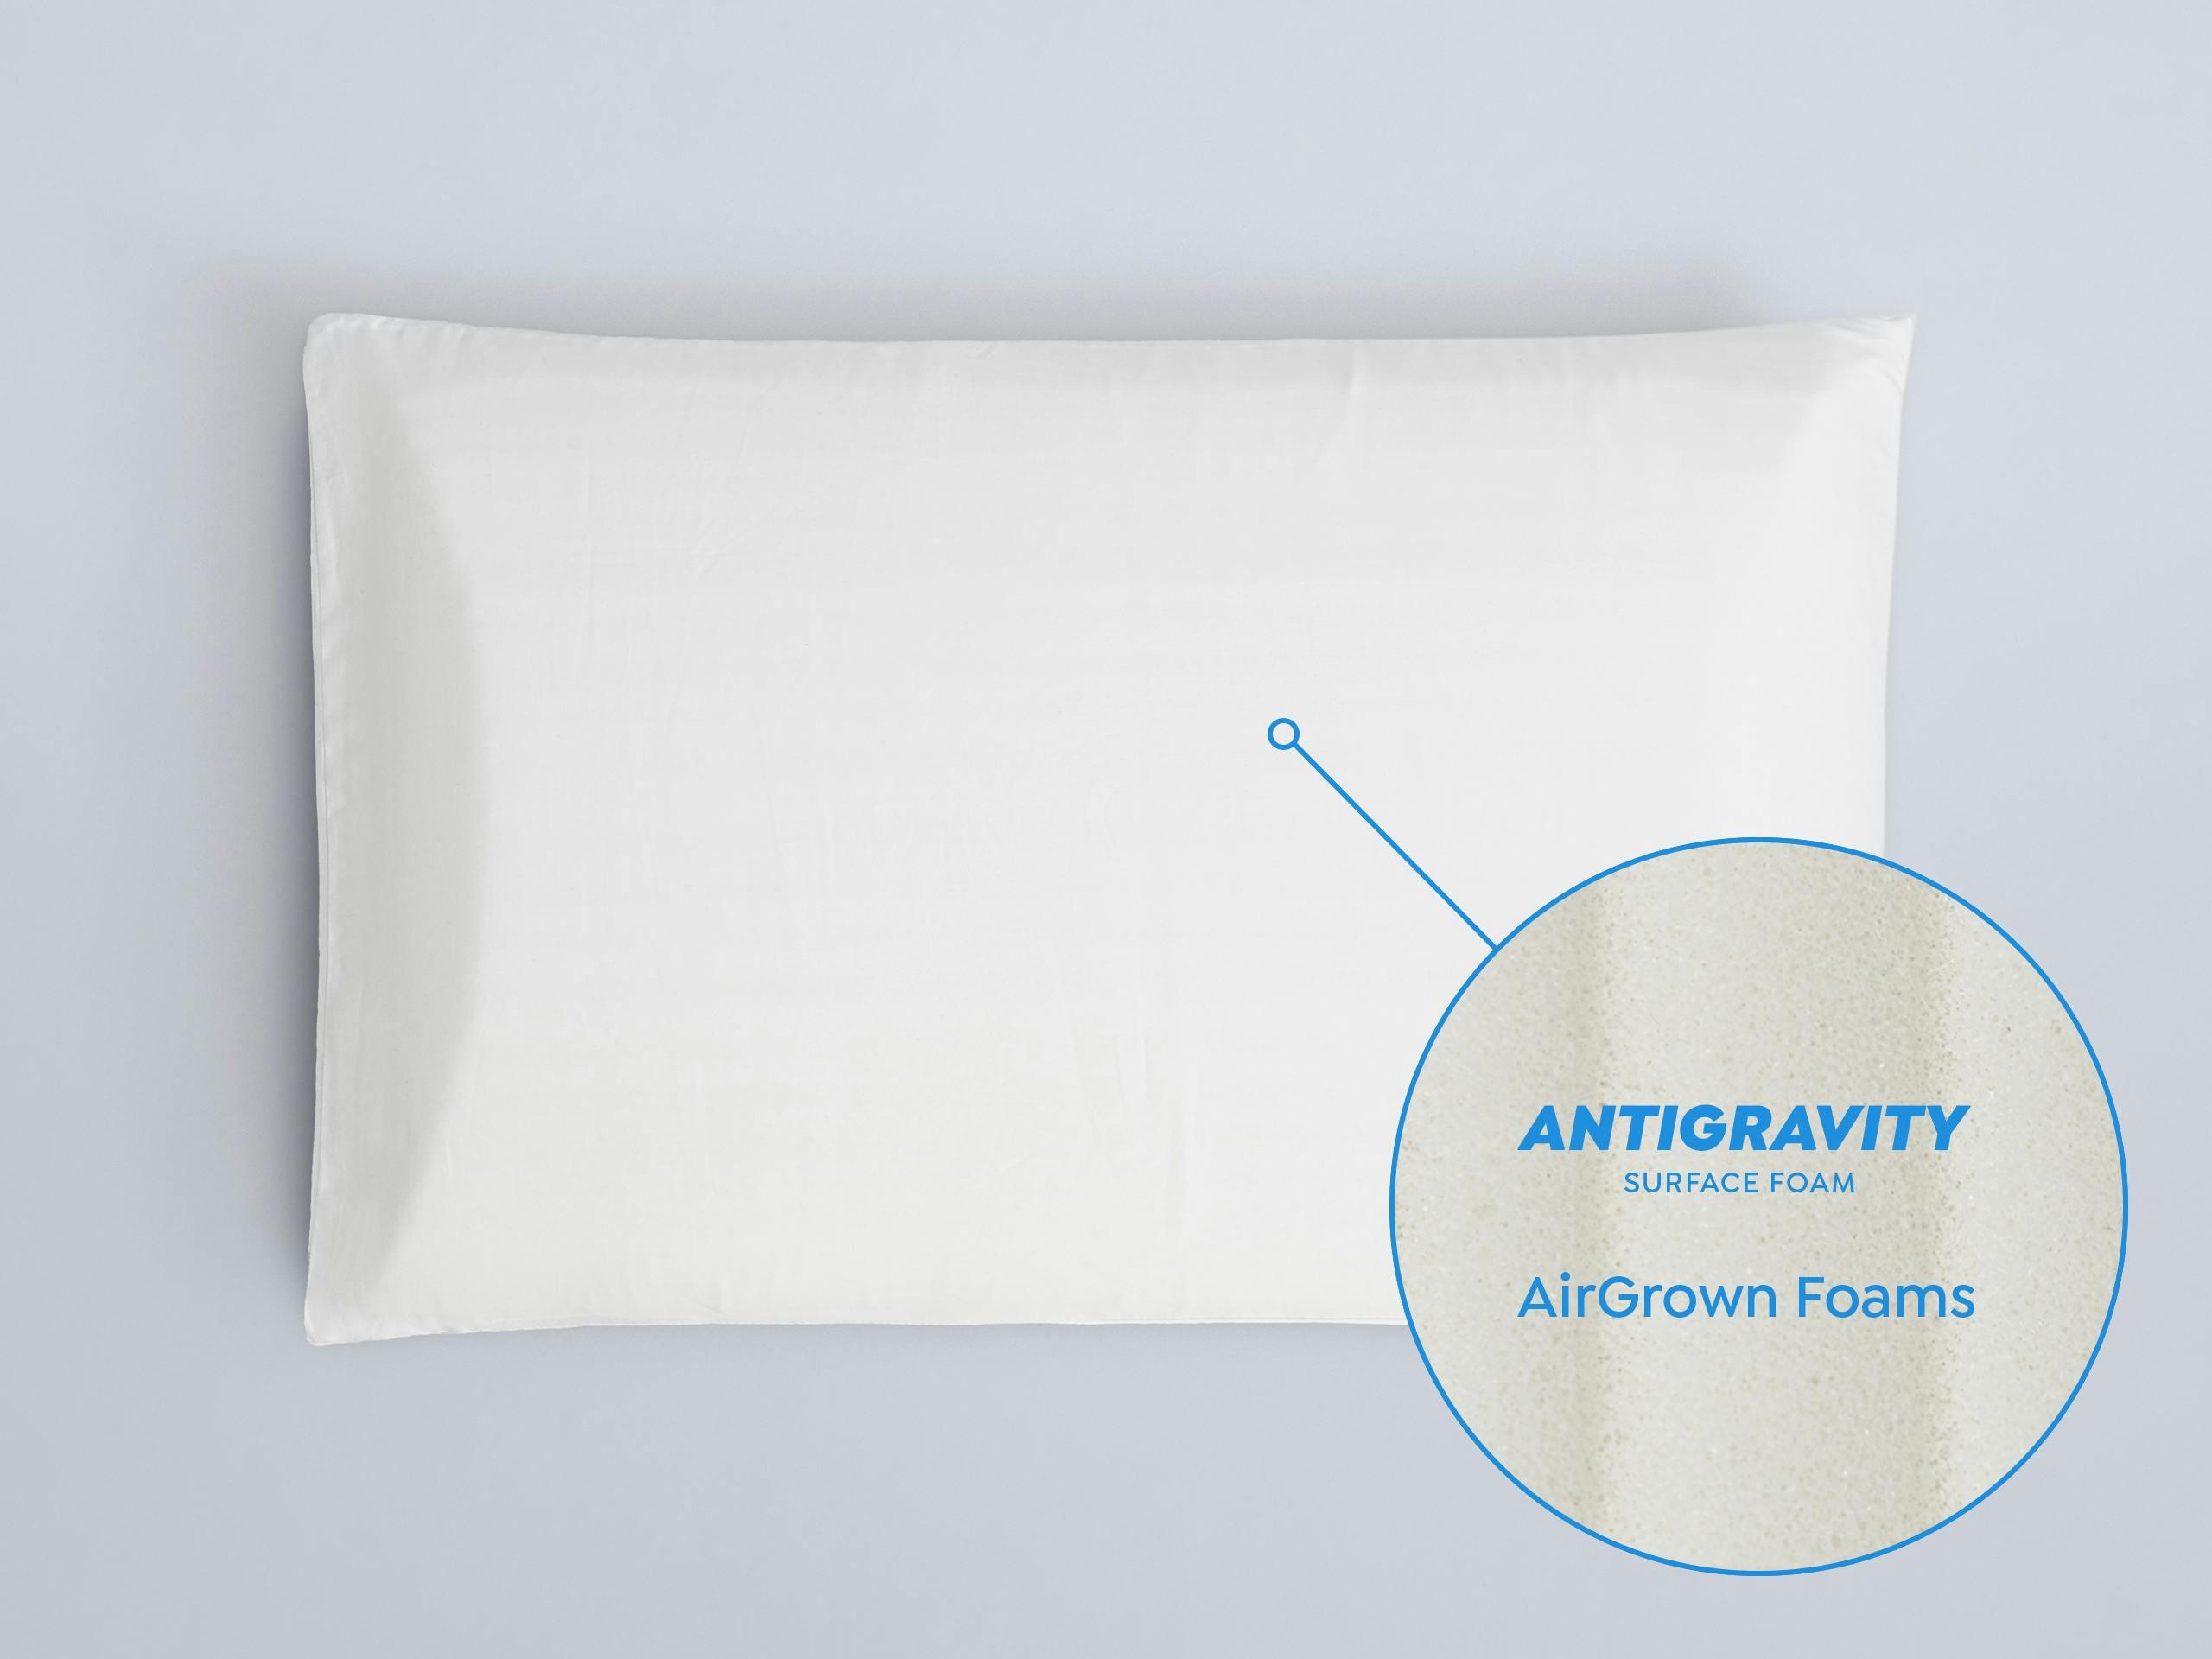 Pillow with a close-up labelled window of the Air Grown AntiGravity Surface Foam.